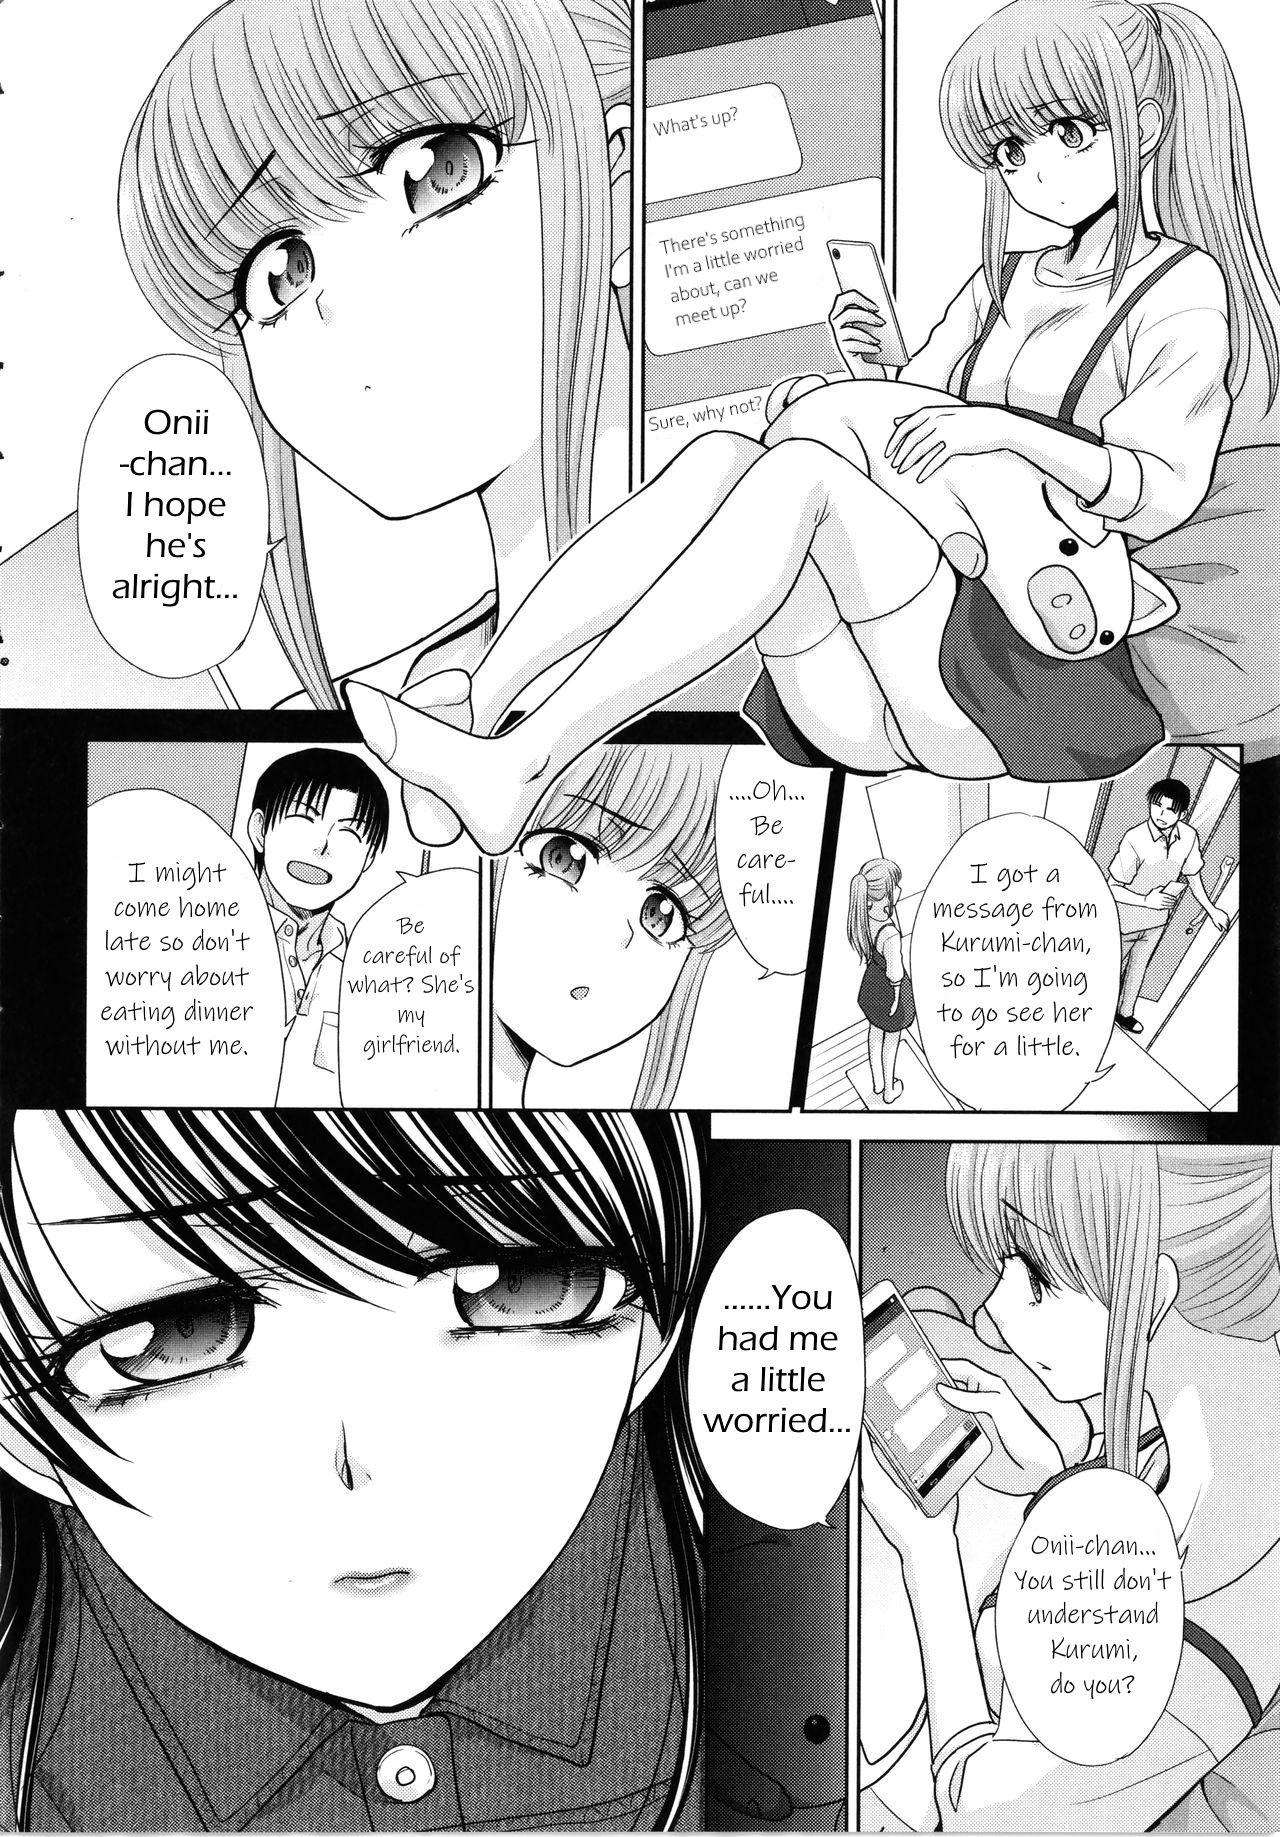 Imouto to Yatte Shimattashi, Imouto no Tomodachi to mo Yatte Shimatta | I had sex with my sister and then I had sex with her friends 147